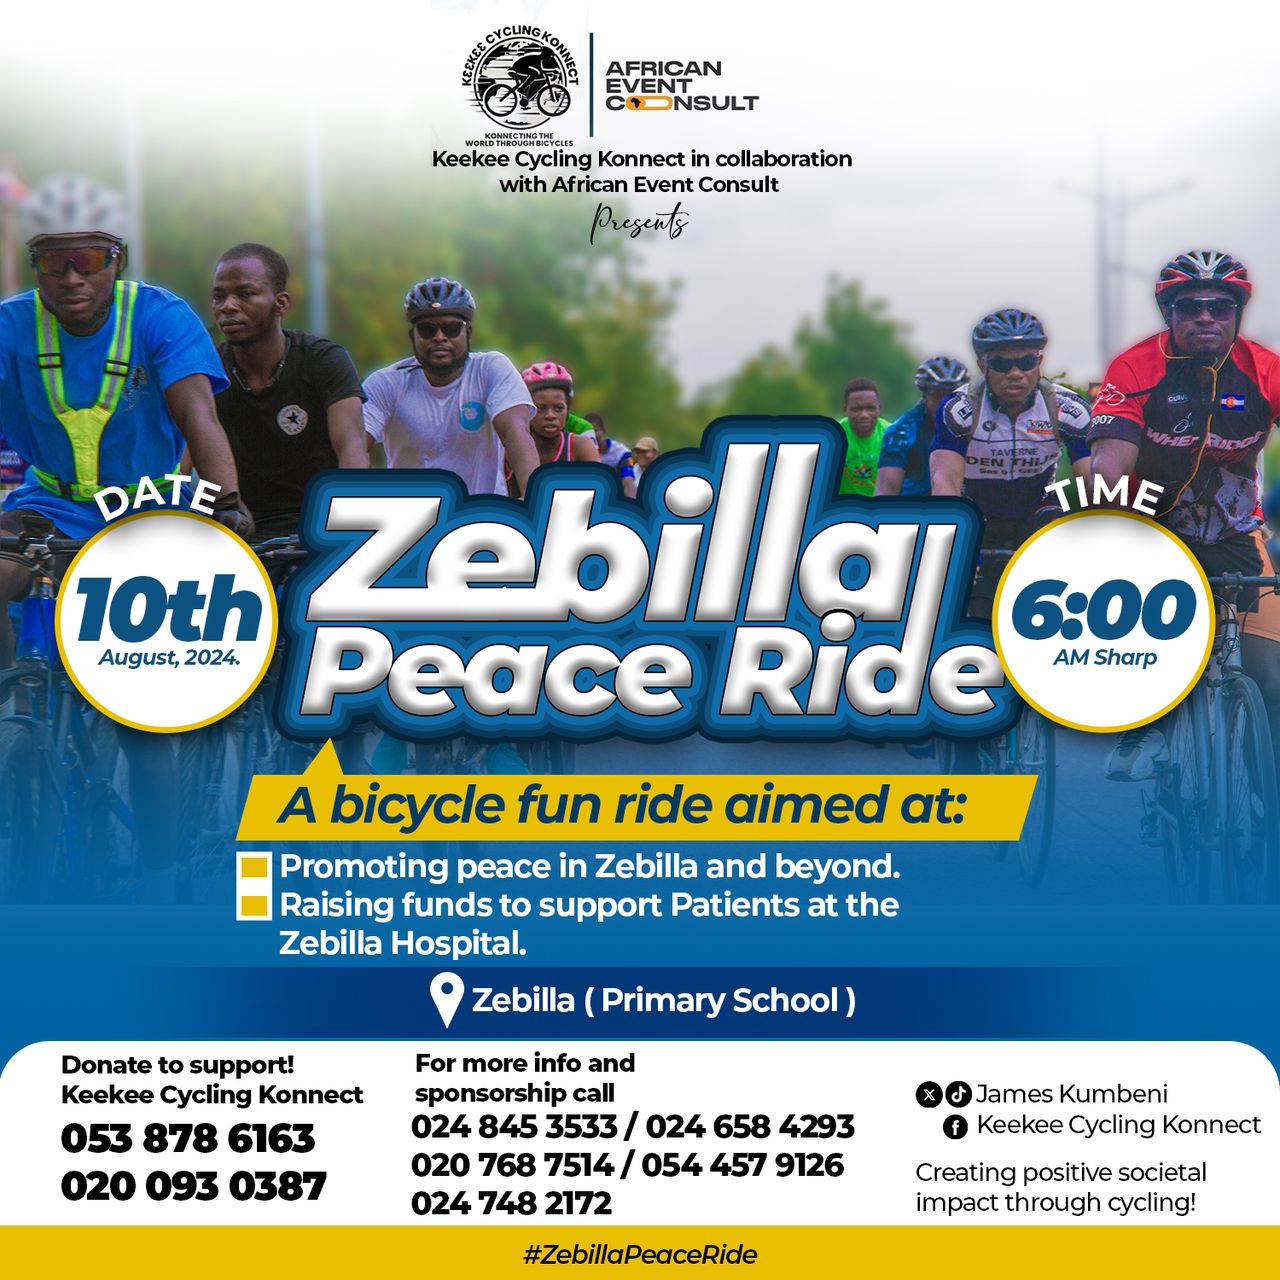 Cyclists to ride to promote peace in Zebilla on August 10